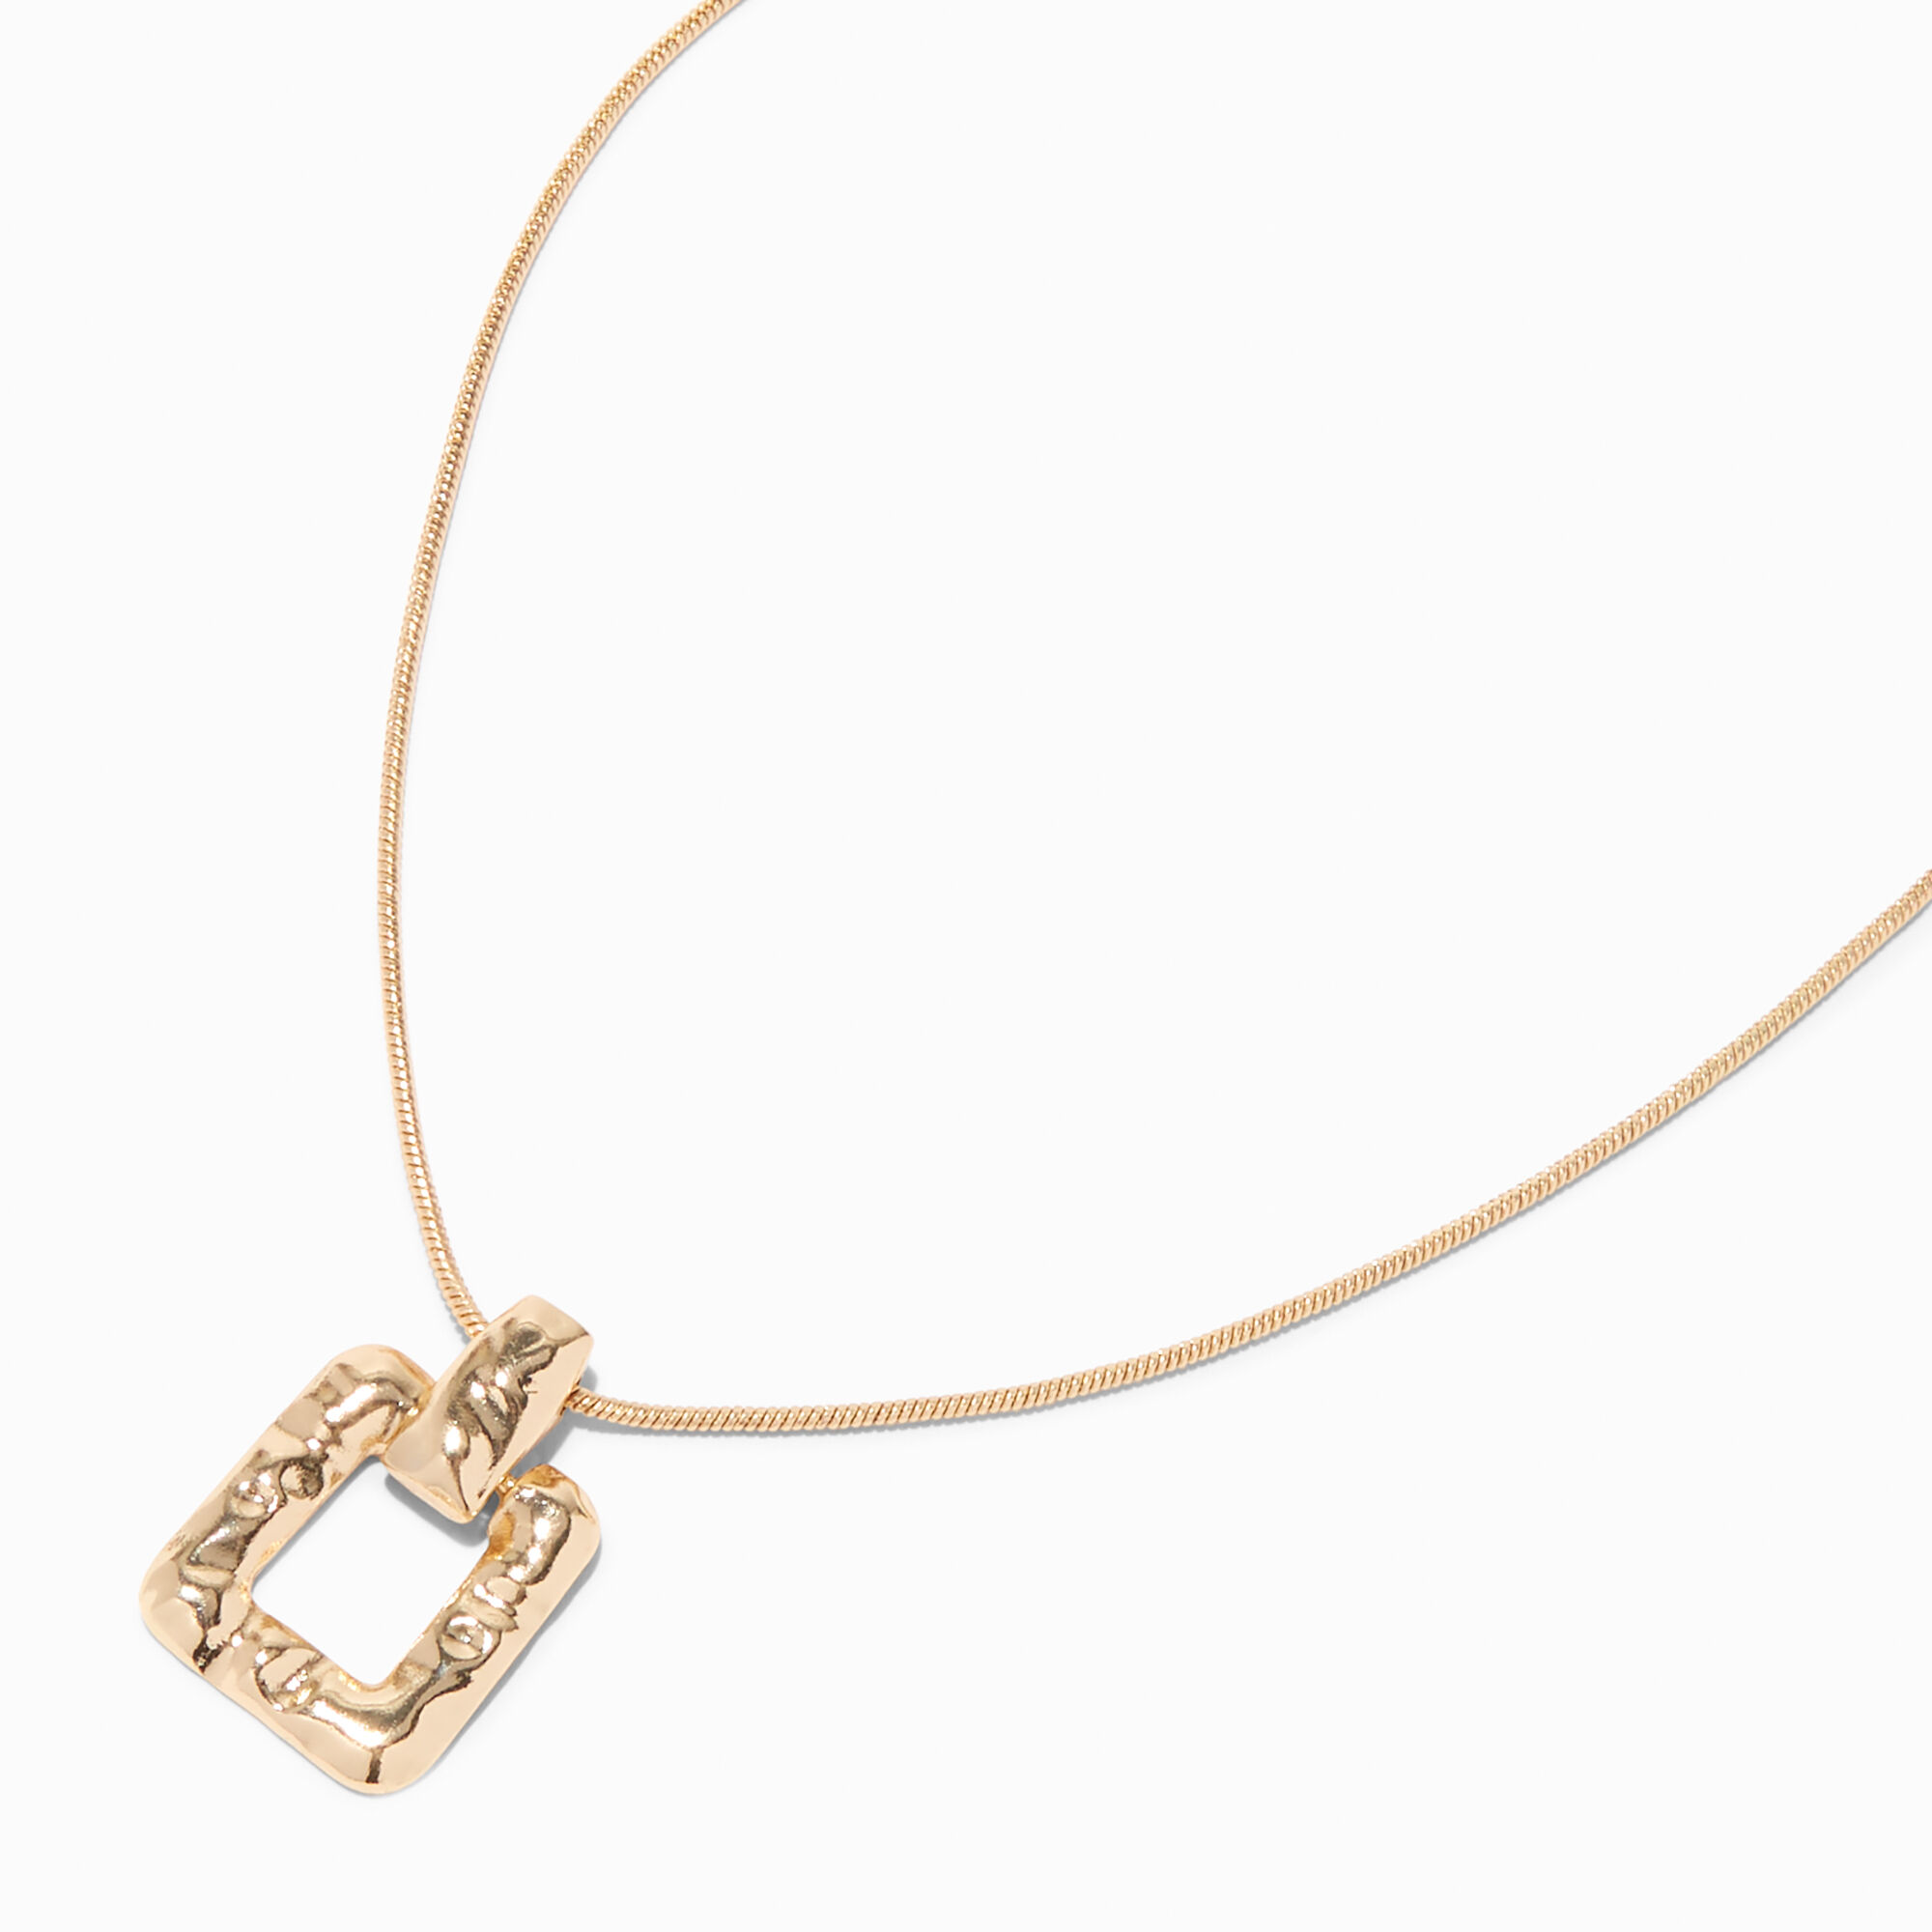 View Claires Tone Textured Square Door Knocker Pendant Necklace Gold information